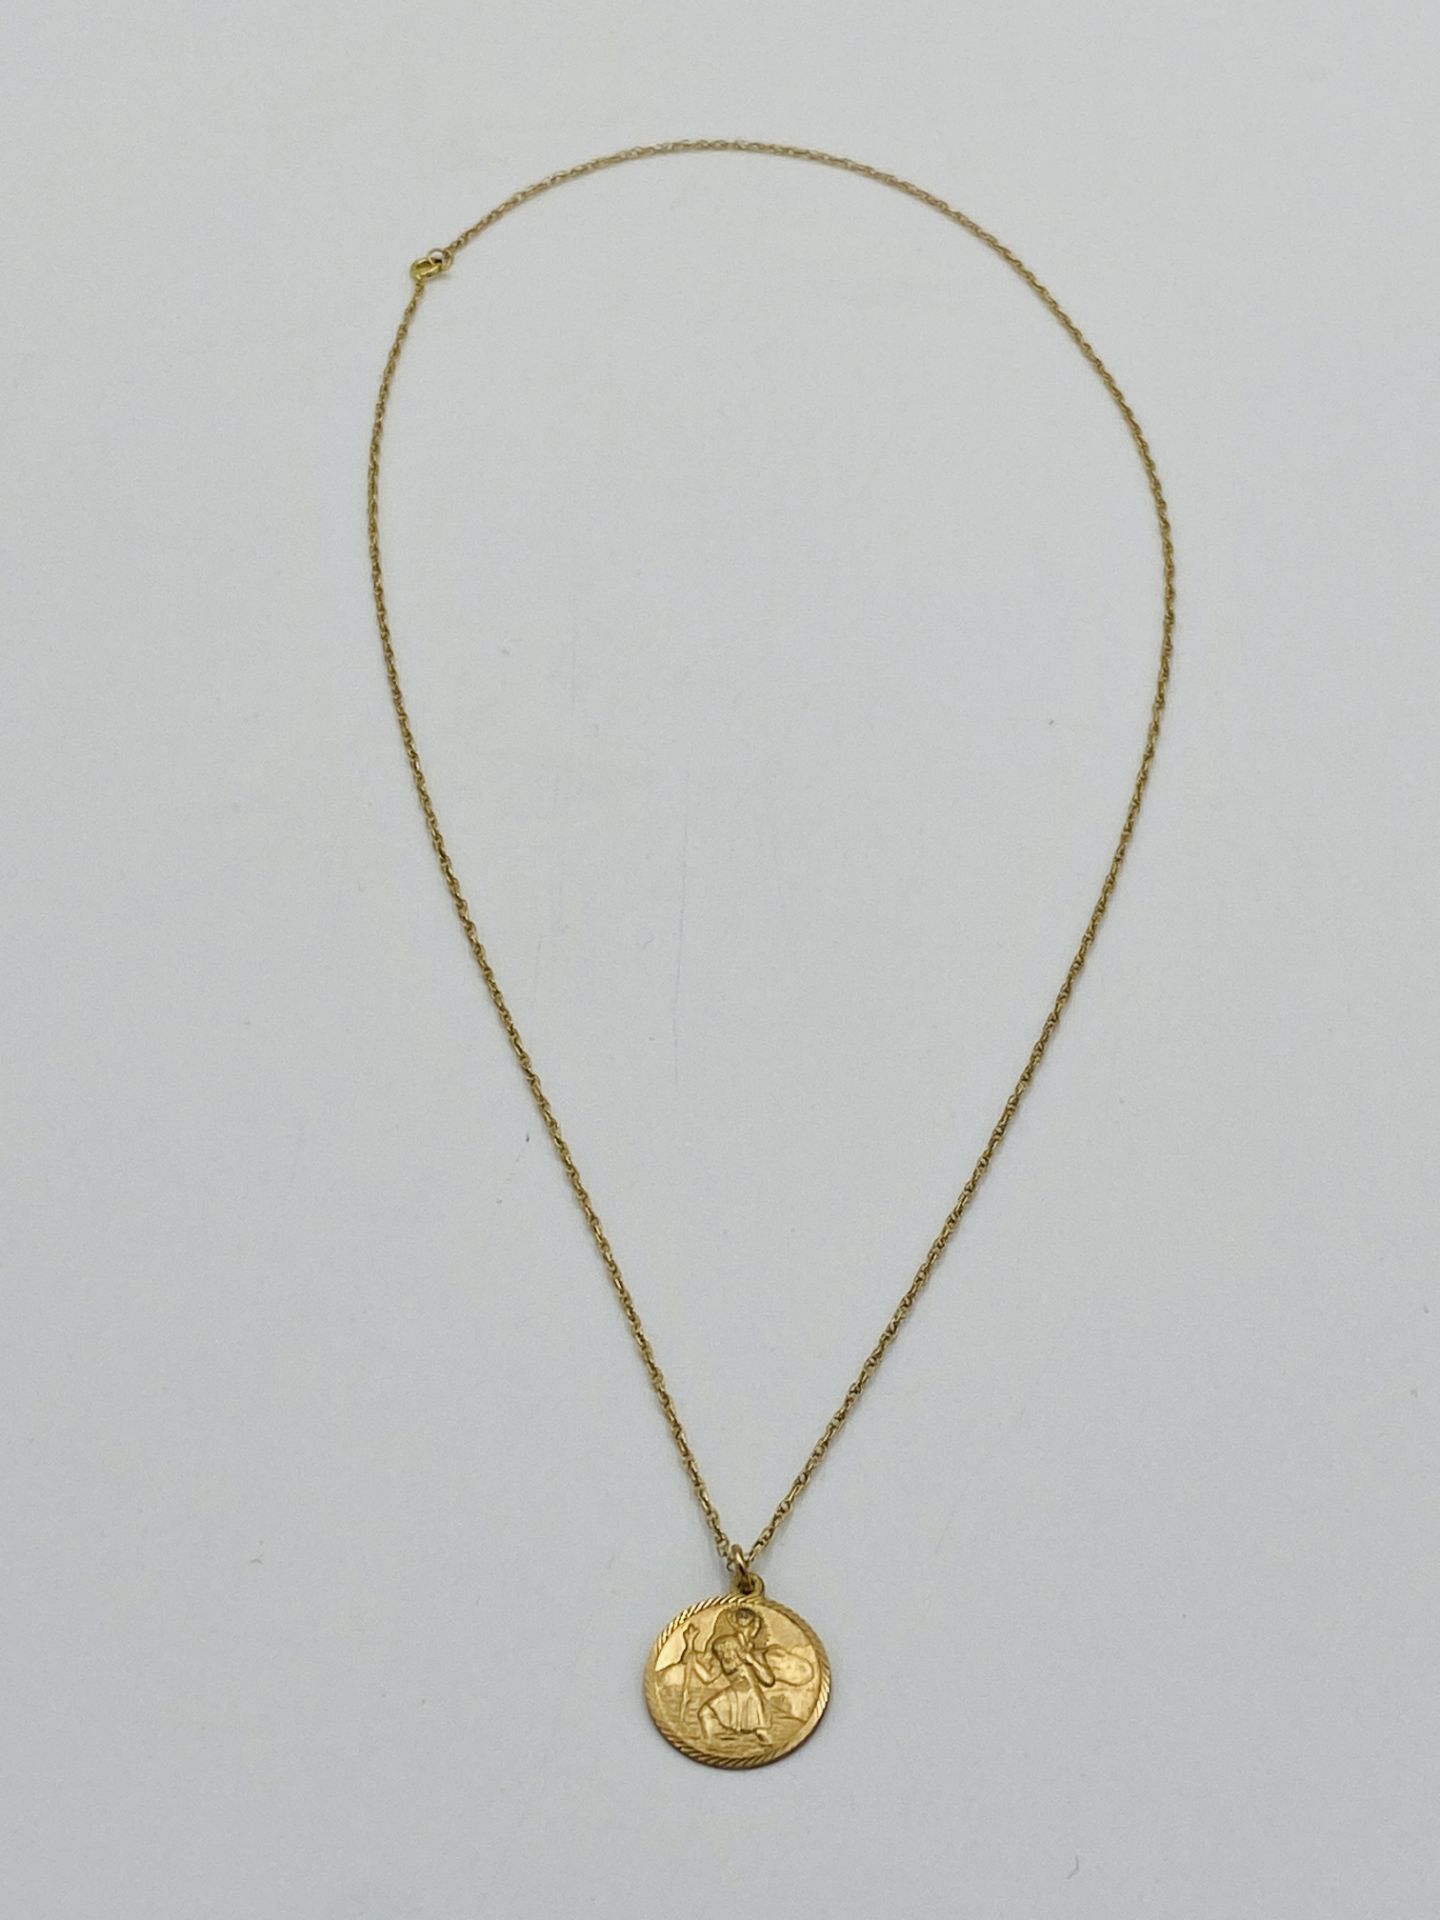 9ct gold St. Christopher on 14ct gold chain - Image 4 of 4